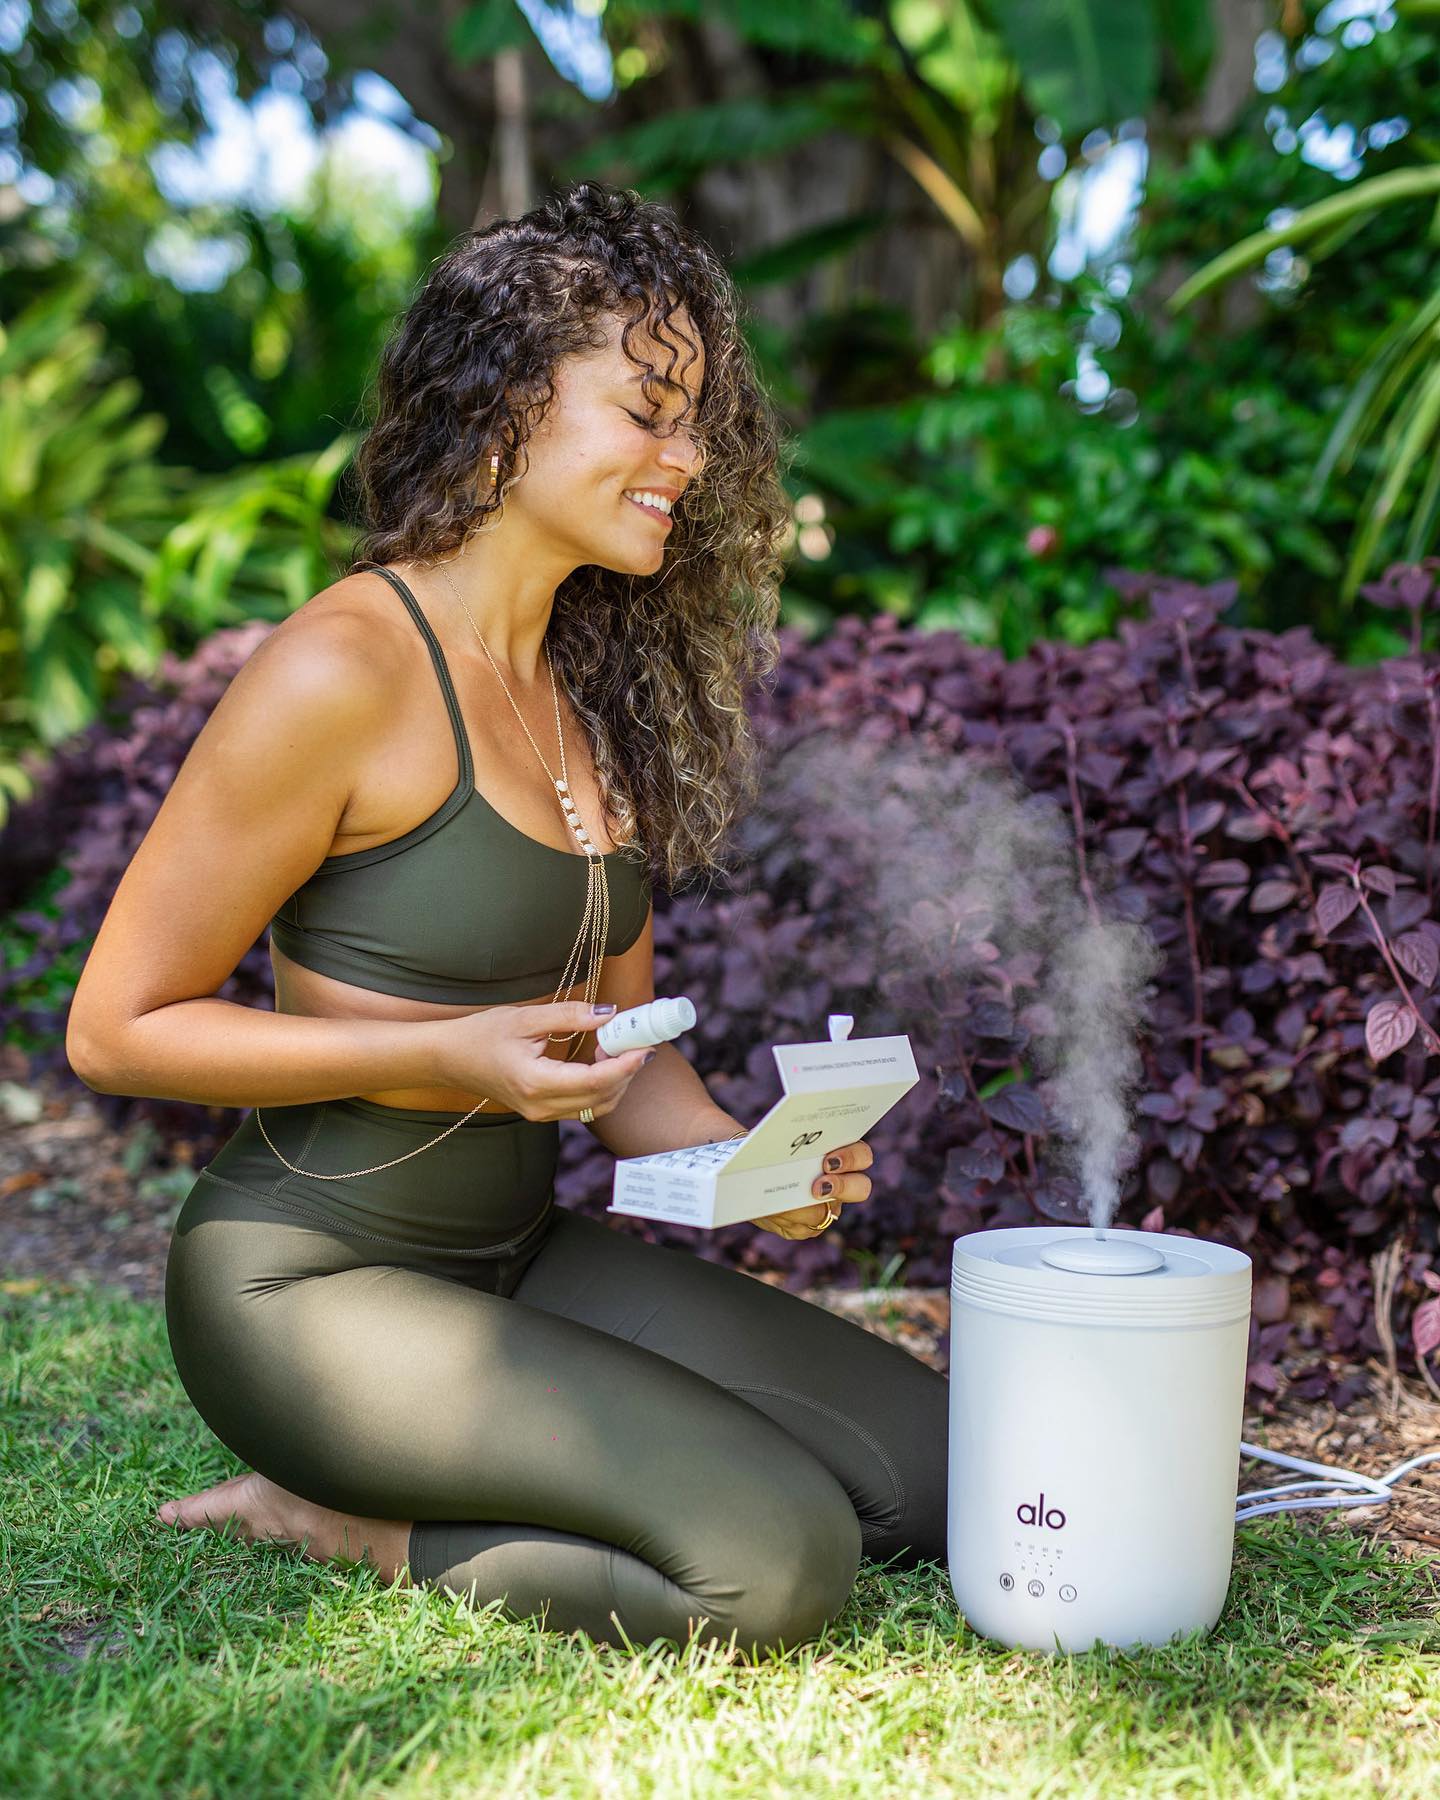 @bloggerswhobrunch post of woman on grass with curly hair, wearing an Alo Yoga Airlift Intrigue Bra and Leggings enjoying an Aura Essential Oil Diffuser 